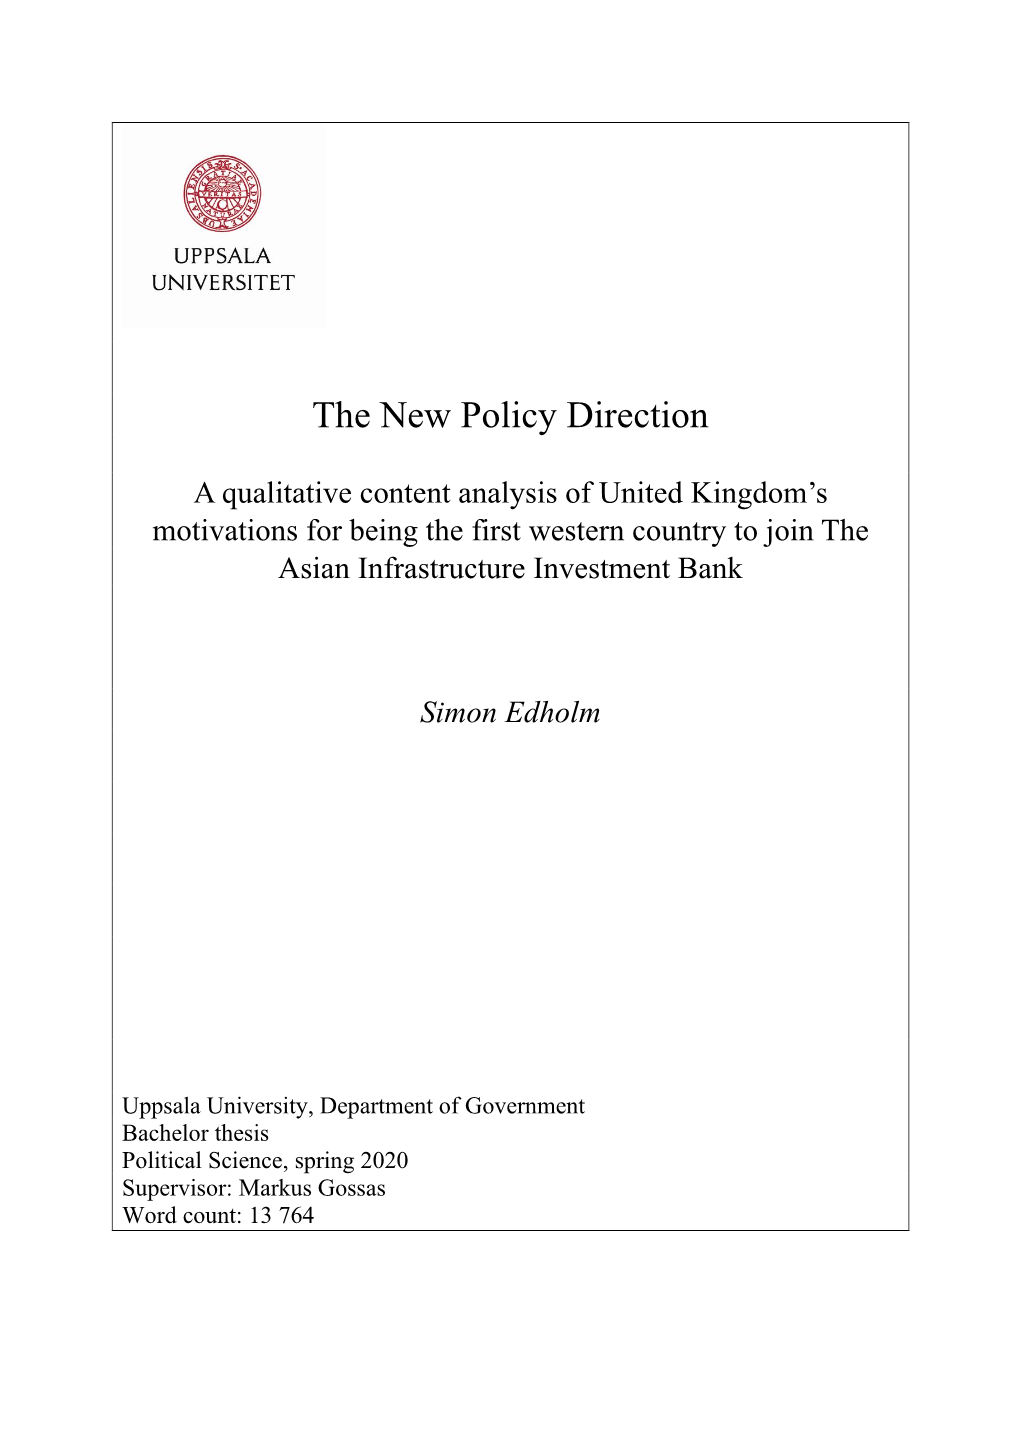 The New Policy Direction